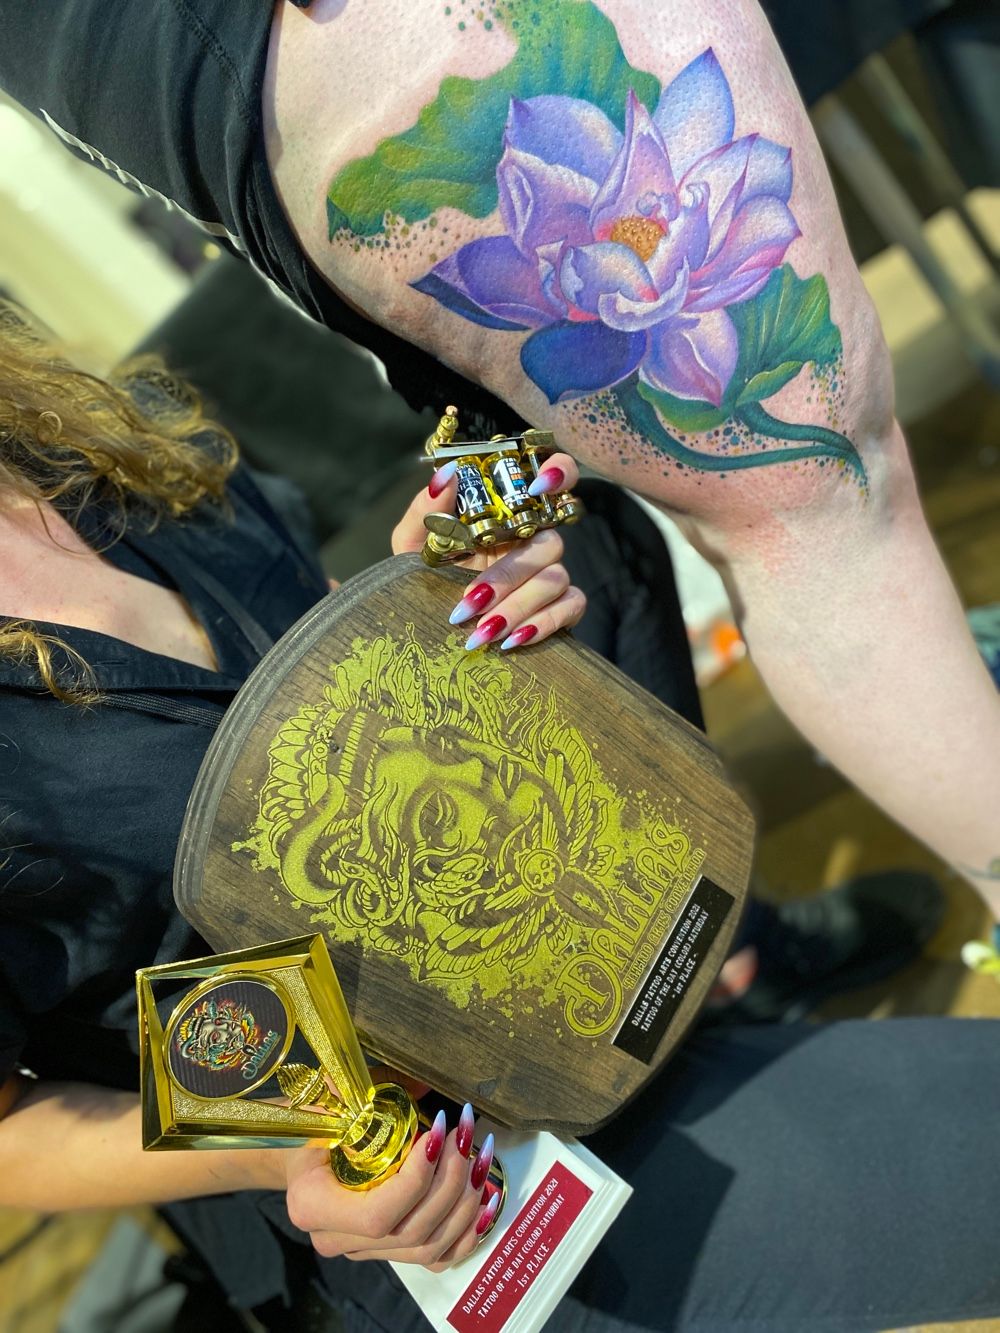 The Worlds Largest Tattoo Convention Is Coming To Dallas This Summer   Narcity